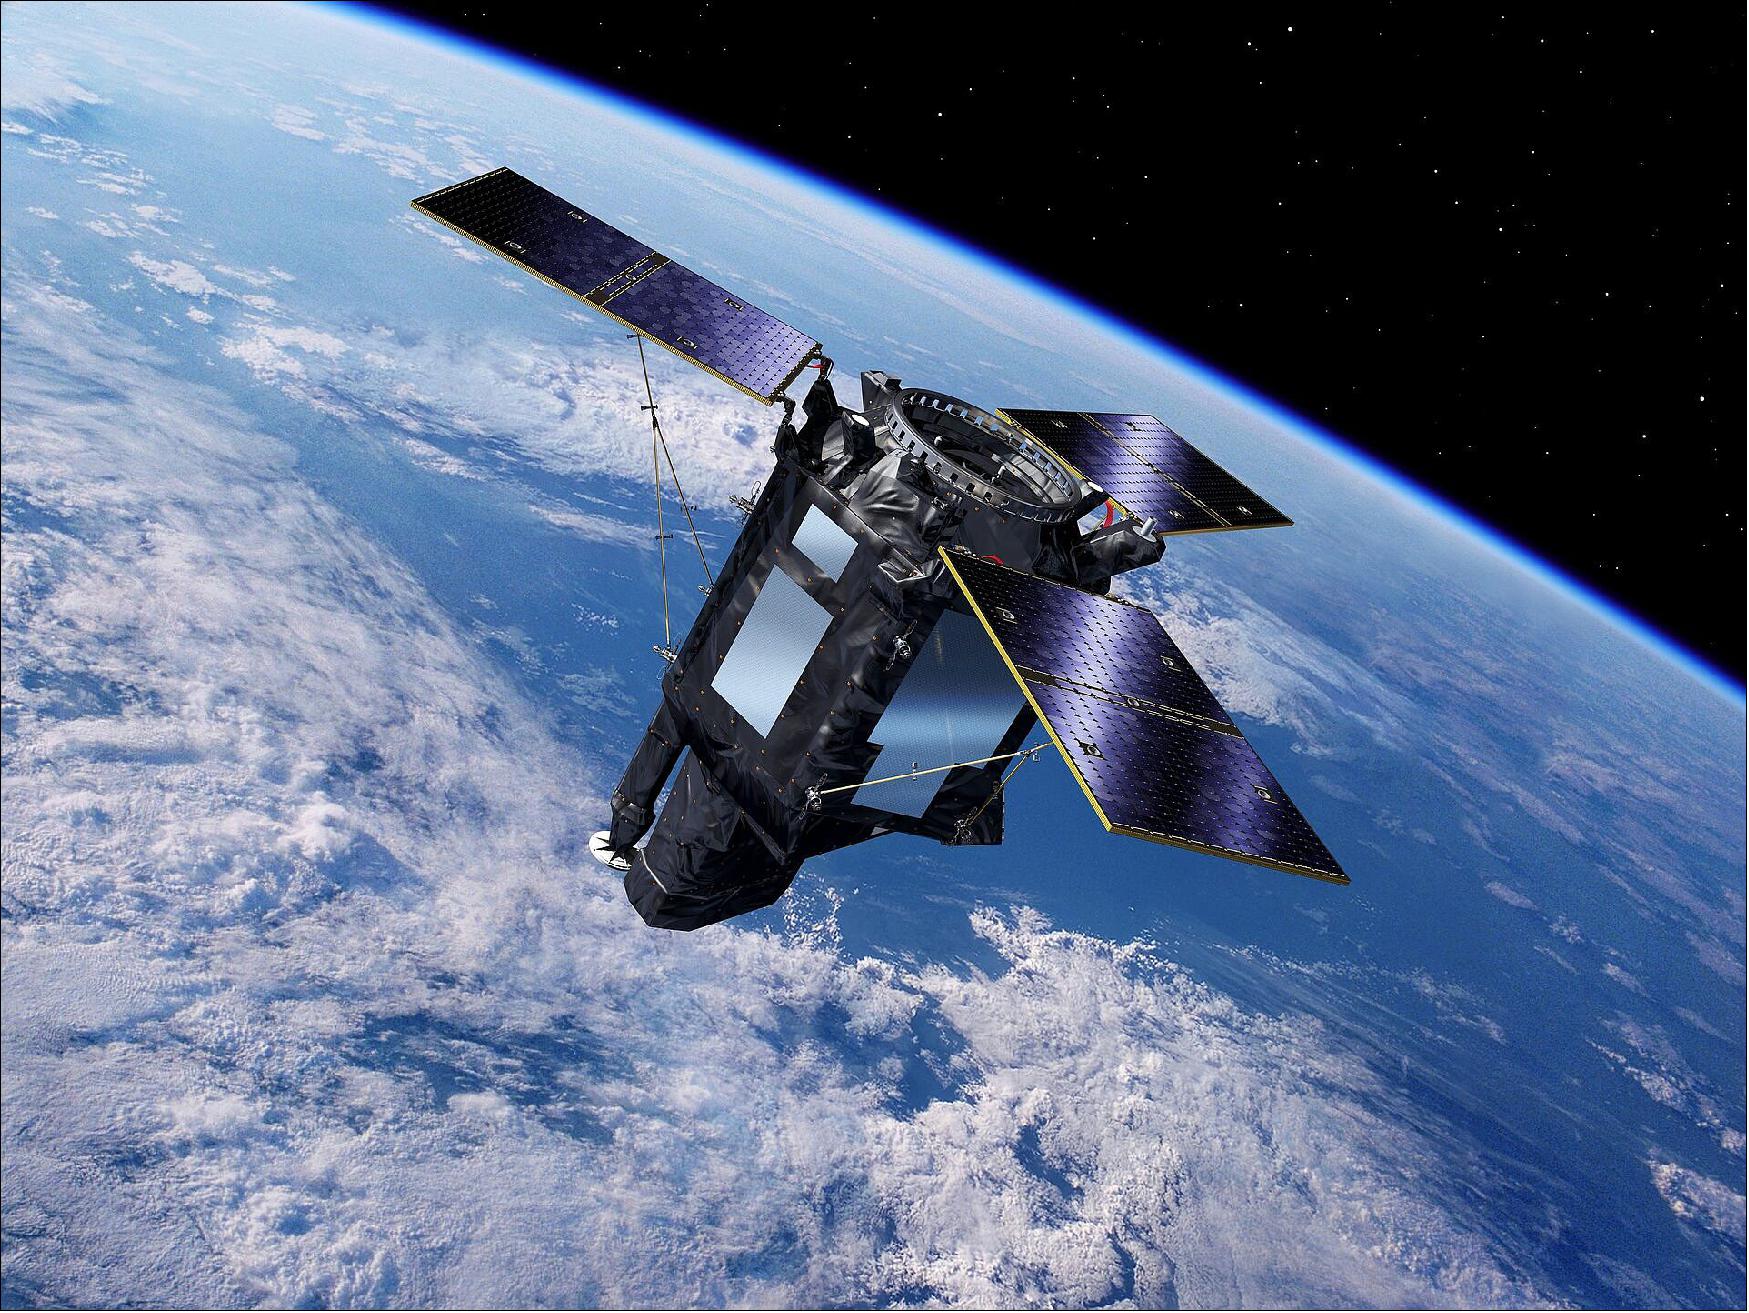 Figure 6: Artist's rendition of the deployed SEOSat-Ingenio spacecraft. The new Spanish high-resolution land imaging mission will provide high-resolution images of Earth's land cover (image credit: Airbus DS)